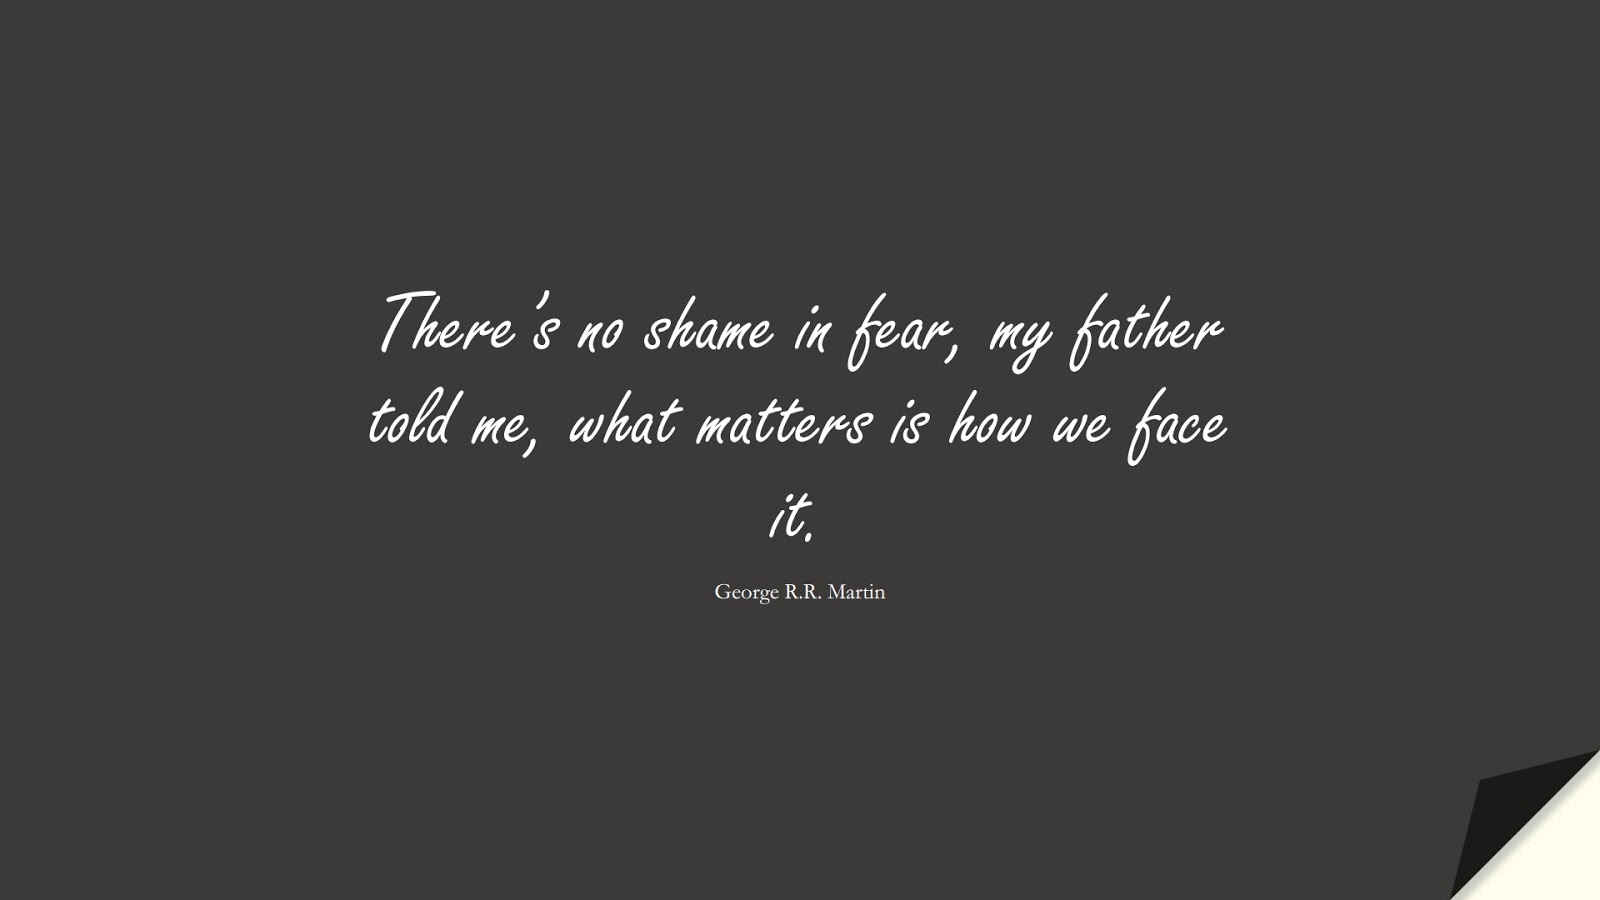 There’s no shame in fear, my father told me, what matters is how we face it. (George R.R. Martin);  #FearQuotes